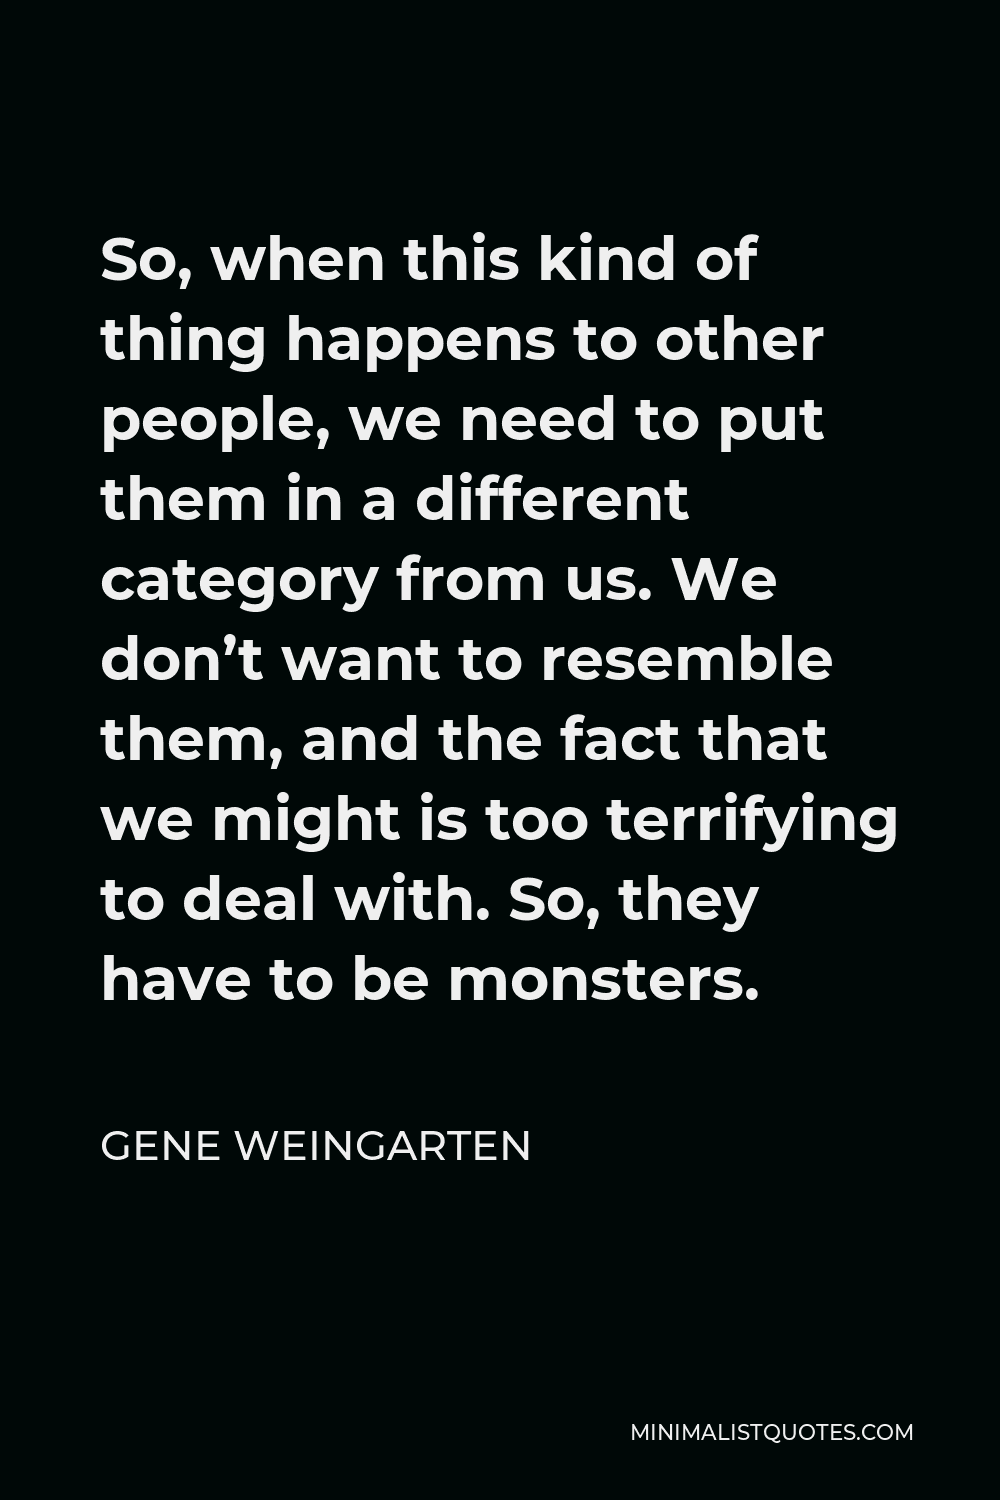 Gene Weingarten Quote - So, when this kind of thing happens to other people, we need to put them in a different category from us. We don’t want to resemble them, and the fact that we might is too terrifying to deal with. So, they have to be monsters.